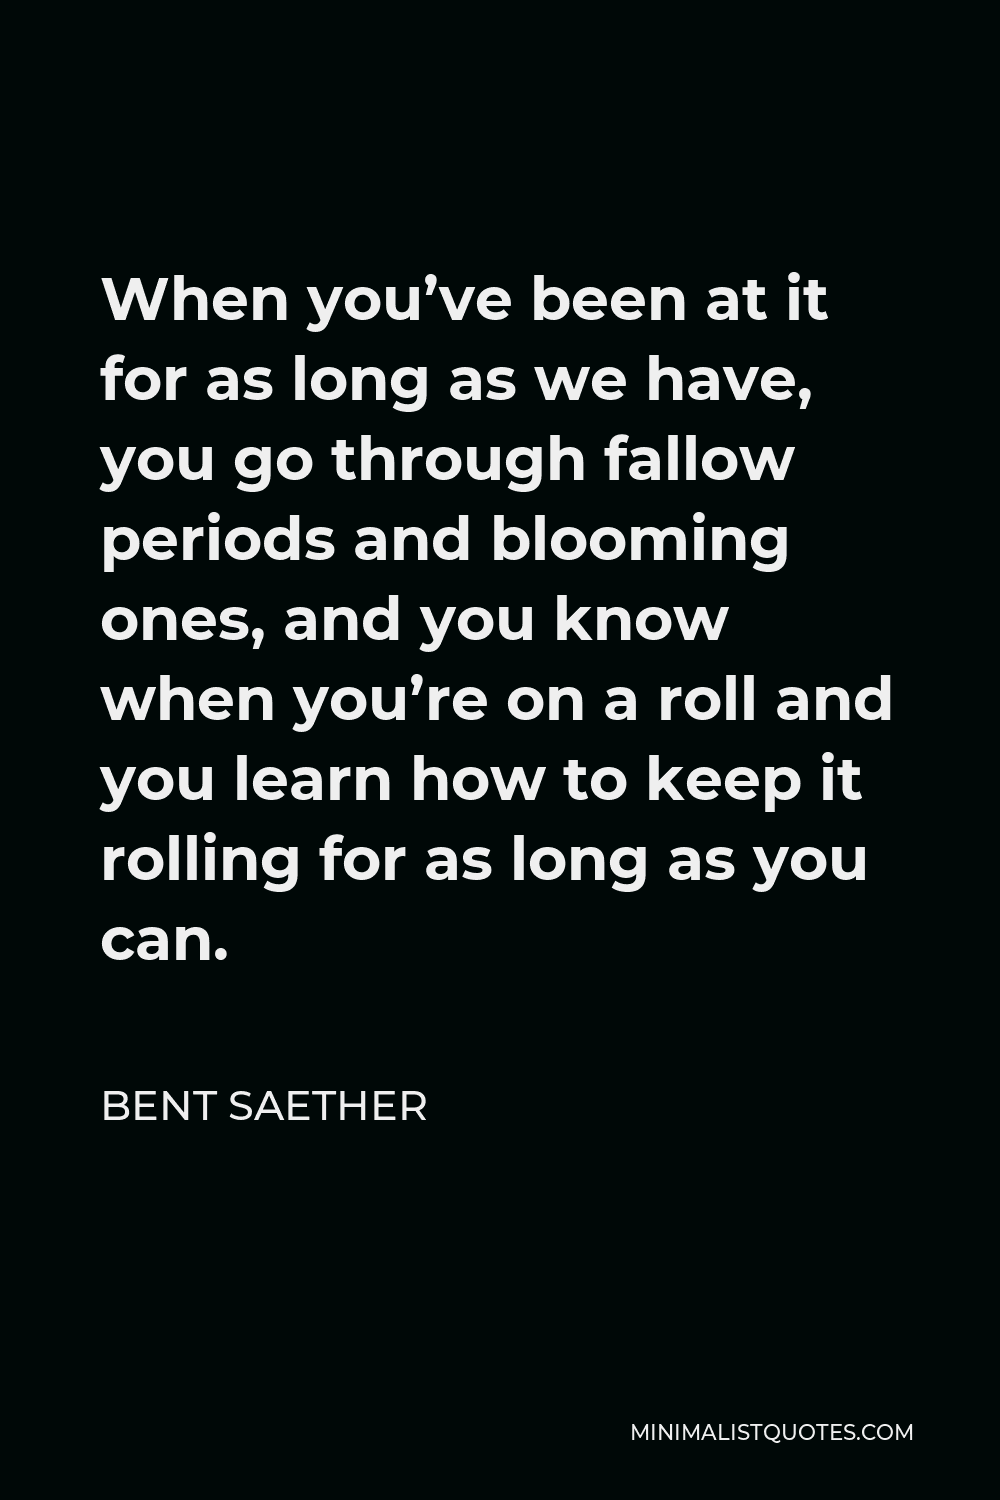 Bent Saether Quote - When you’ve been at it for as long as we have, you go through fallow periods and blooming ones, and you know when you’re on a roll and you learn how to keep it rolling for as long as you can.